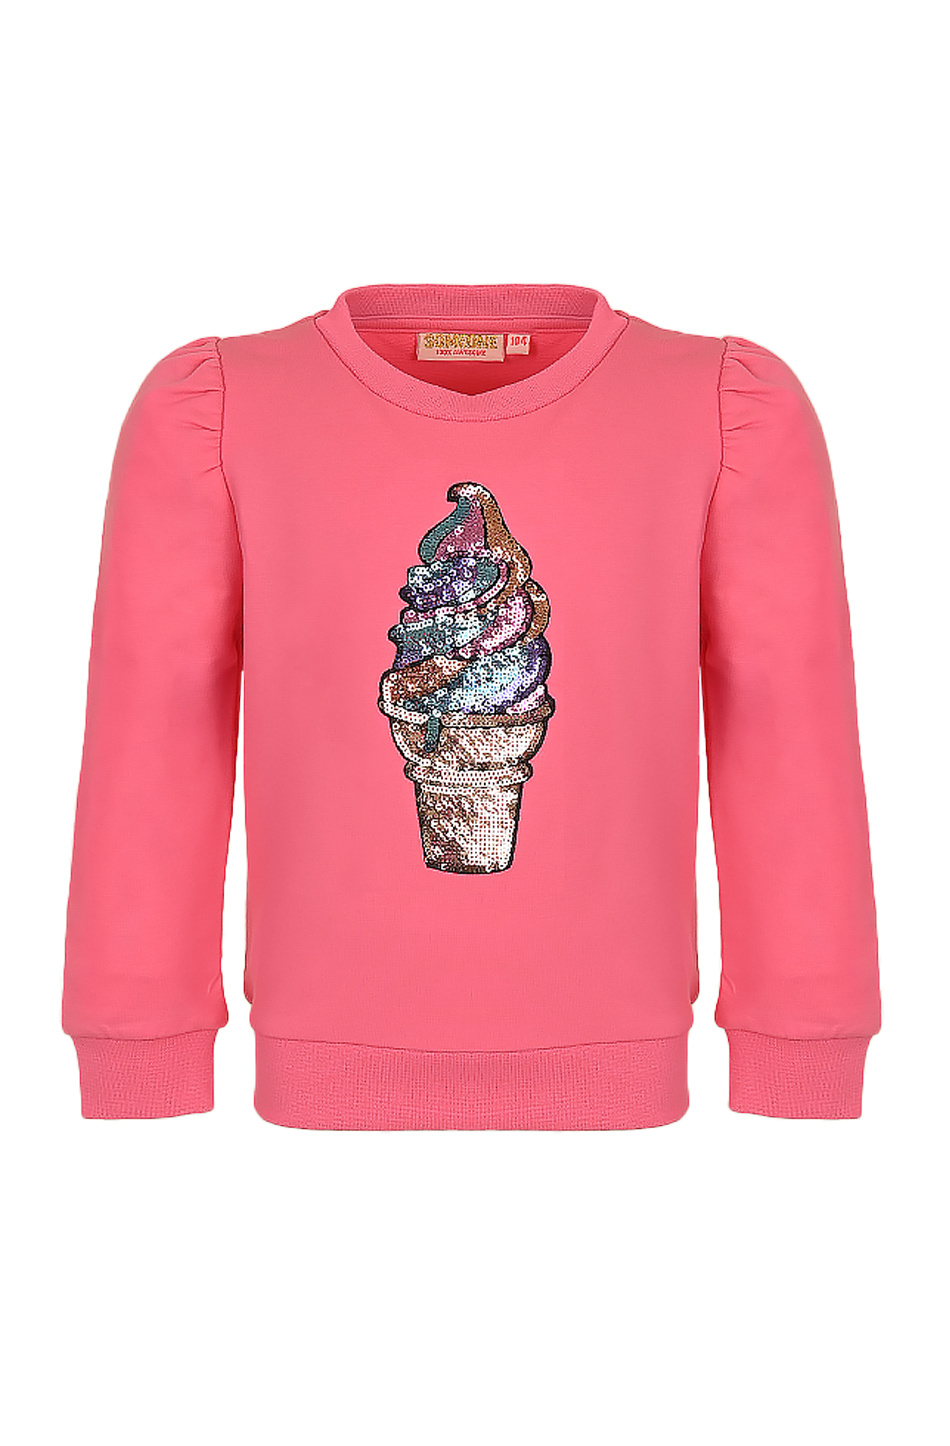 Someone Meisjes sweater - Claire-SG-16-G - Fluo roze